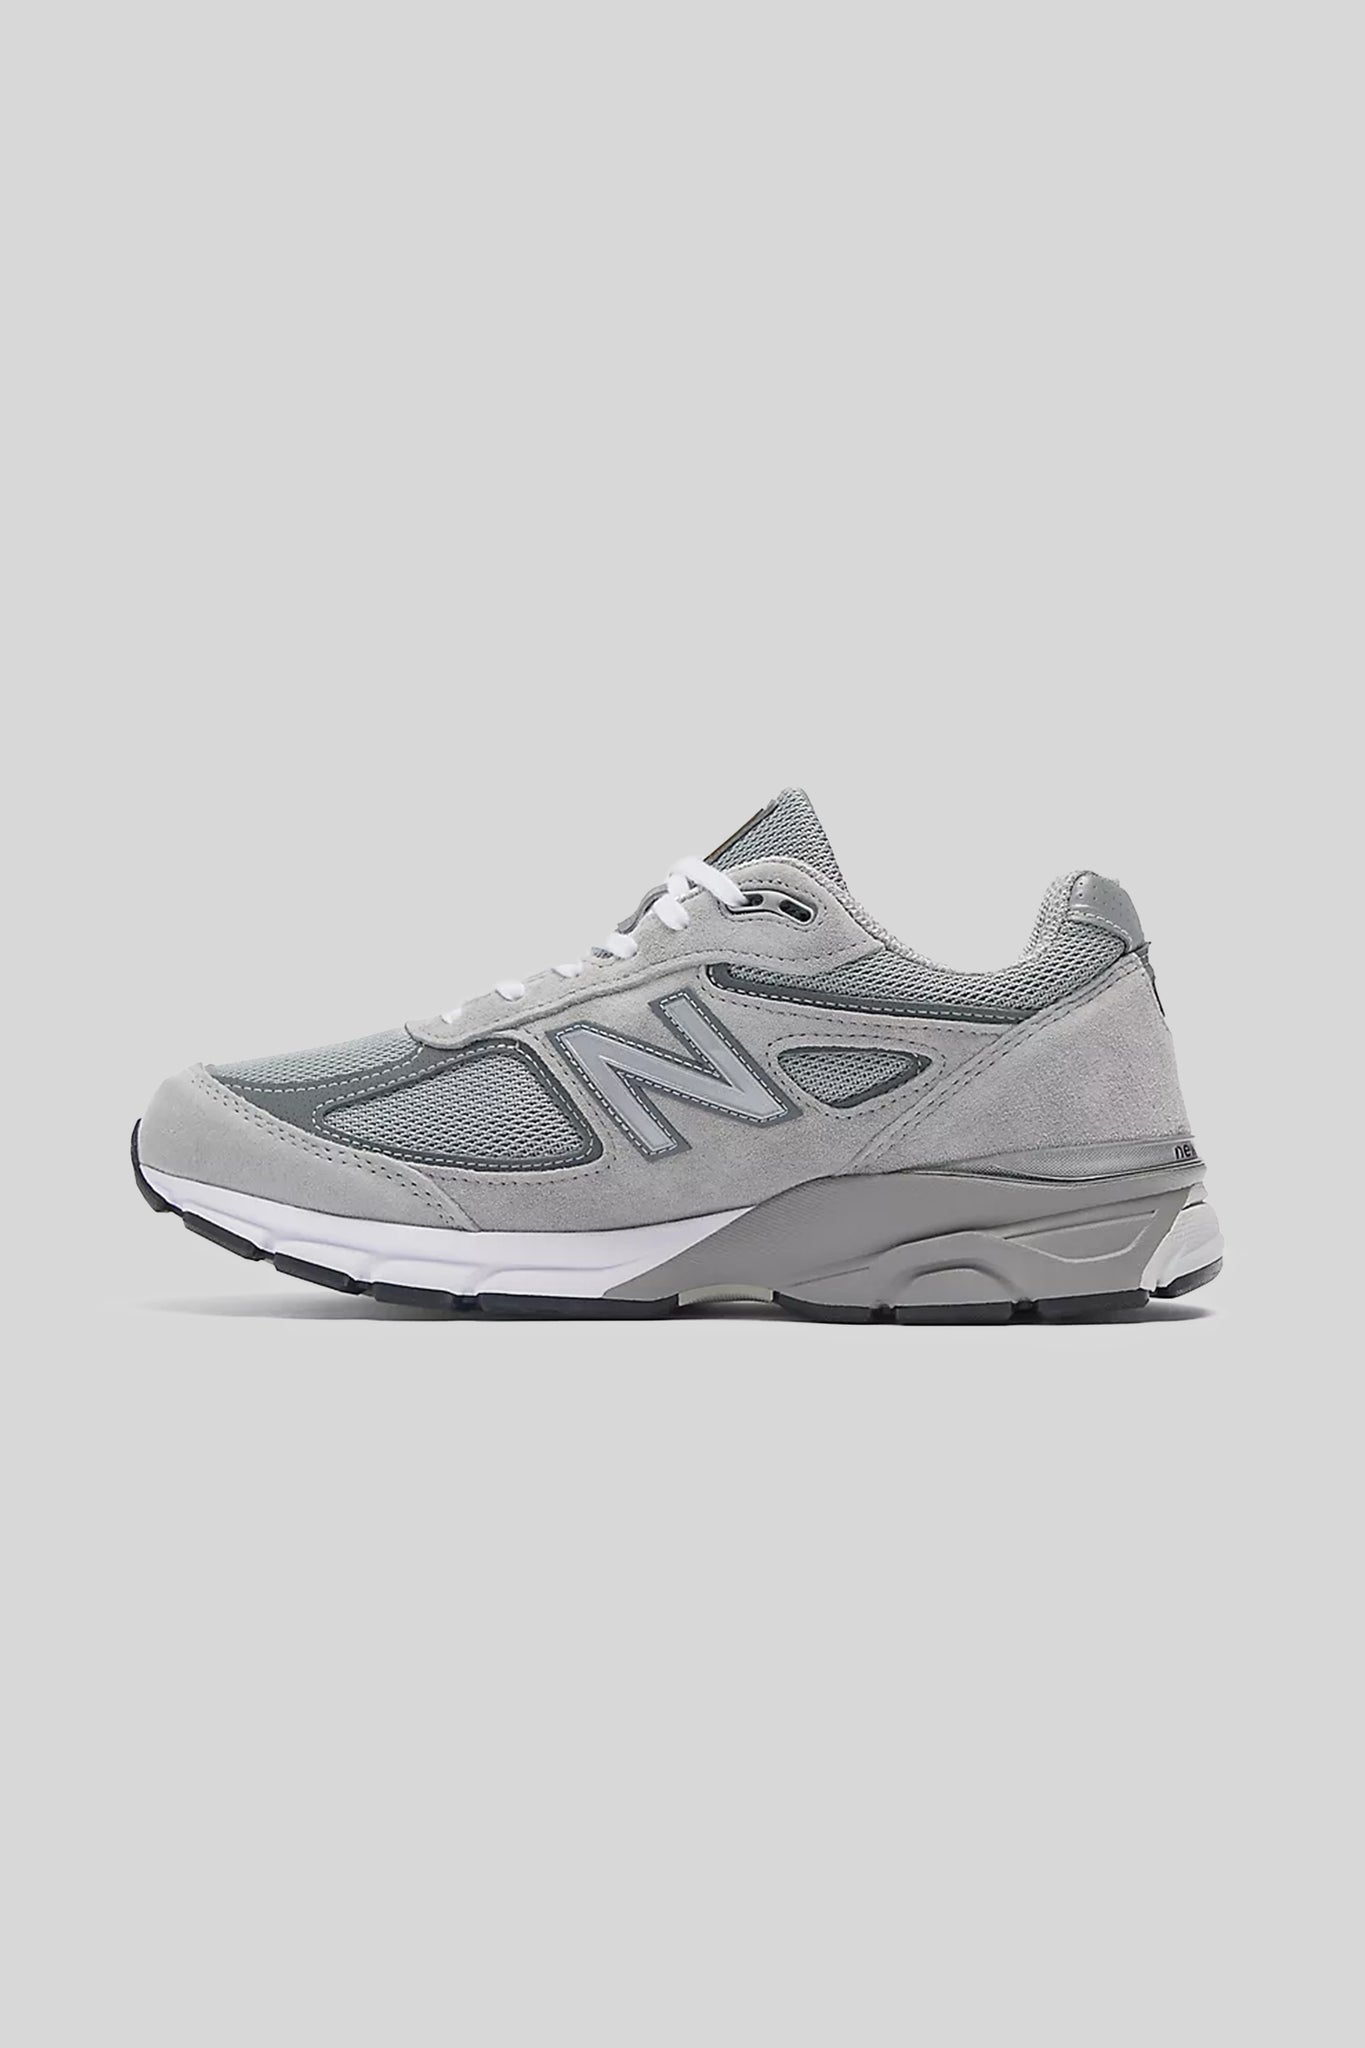 New Balance Men's Made in USA 990v4 Core Sneaker in Grey with Silver